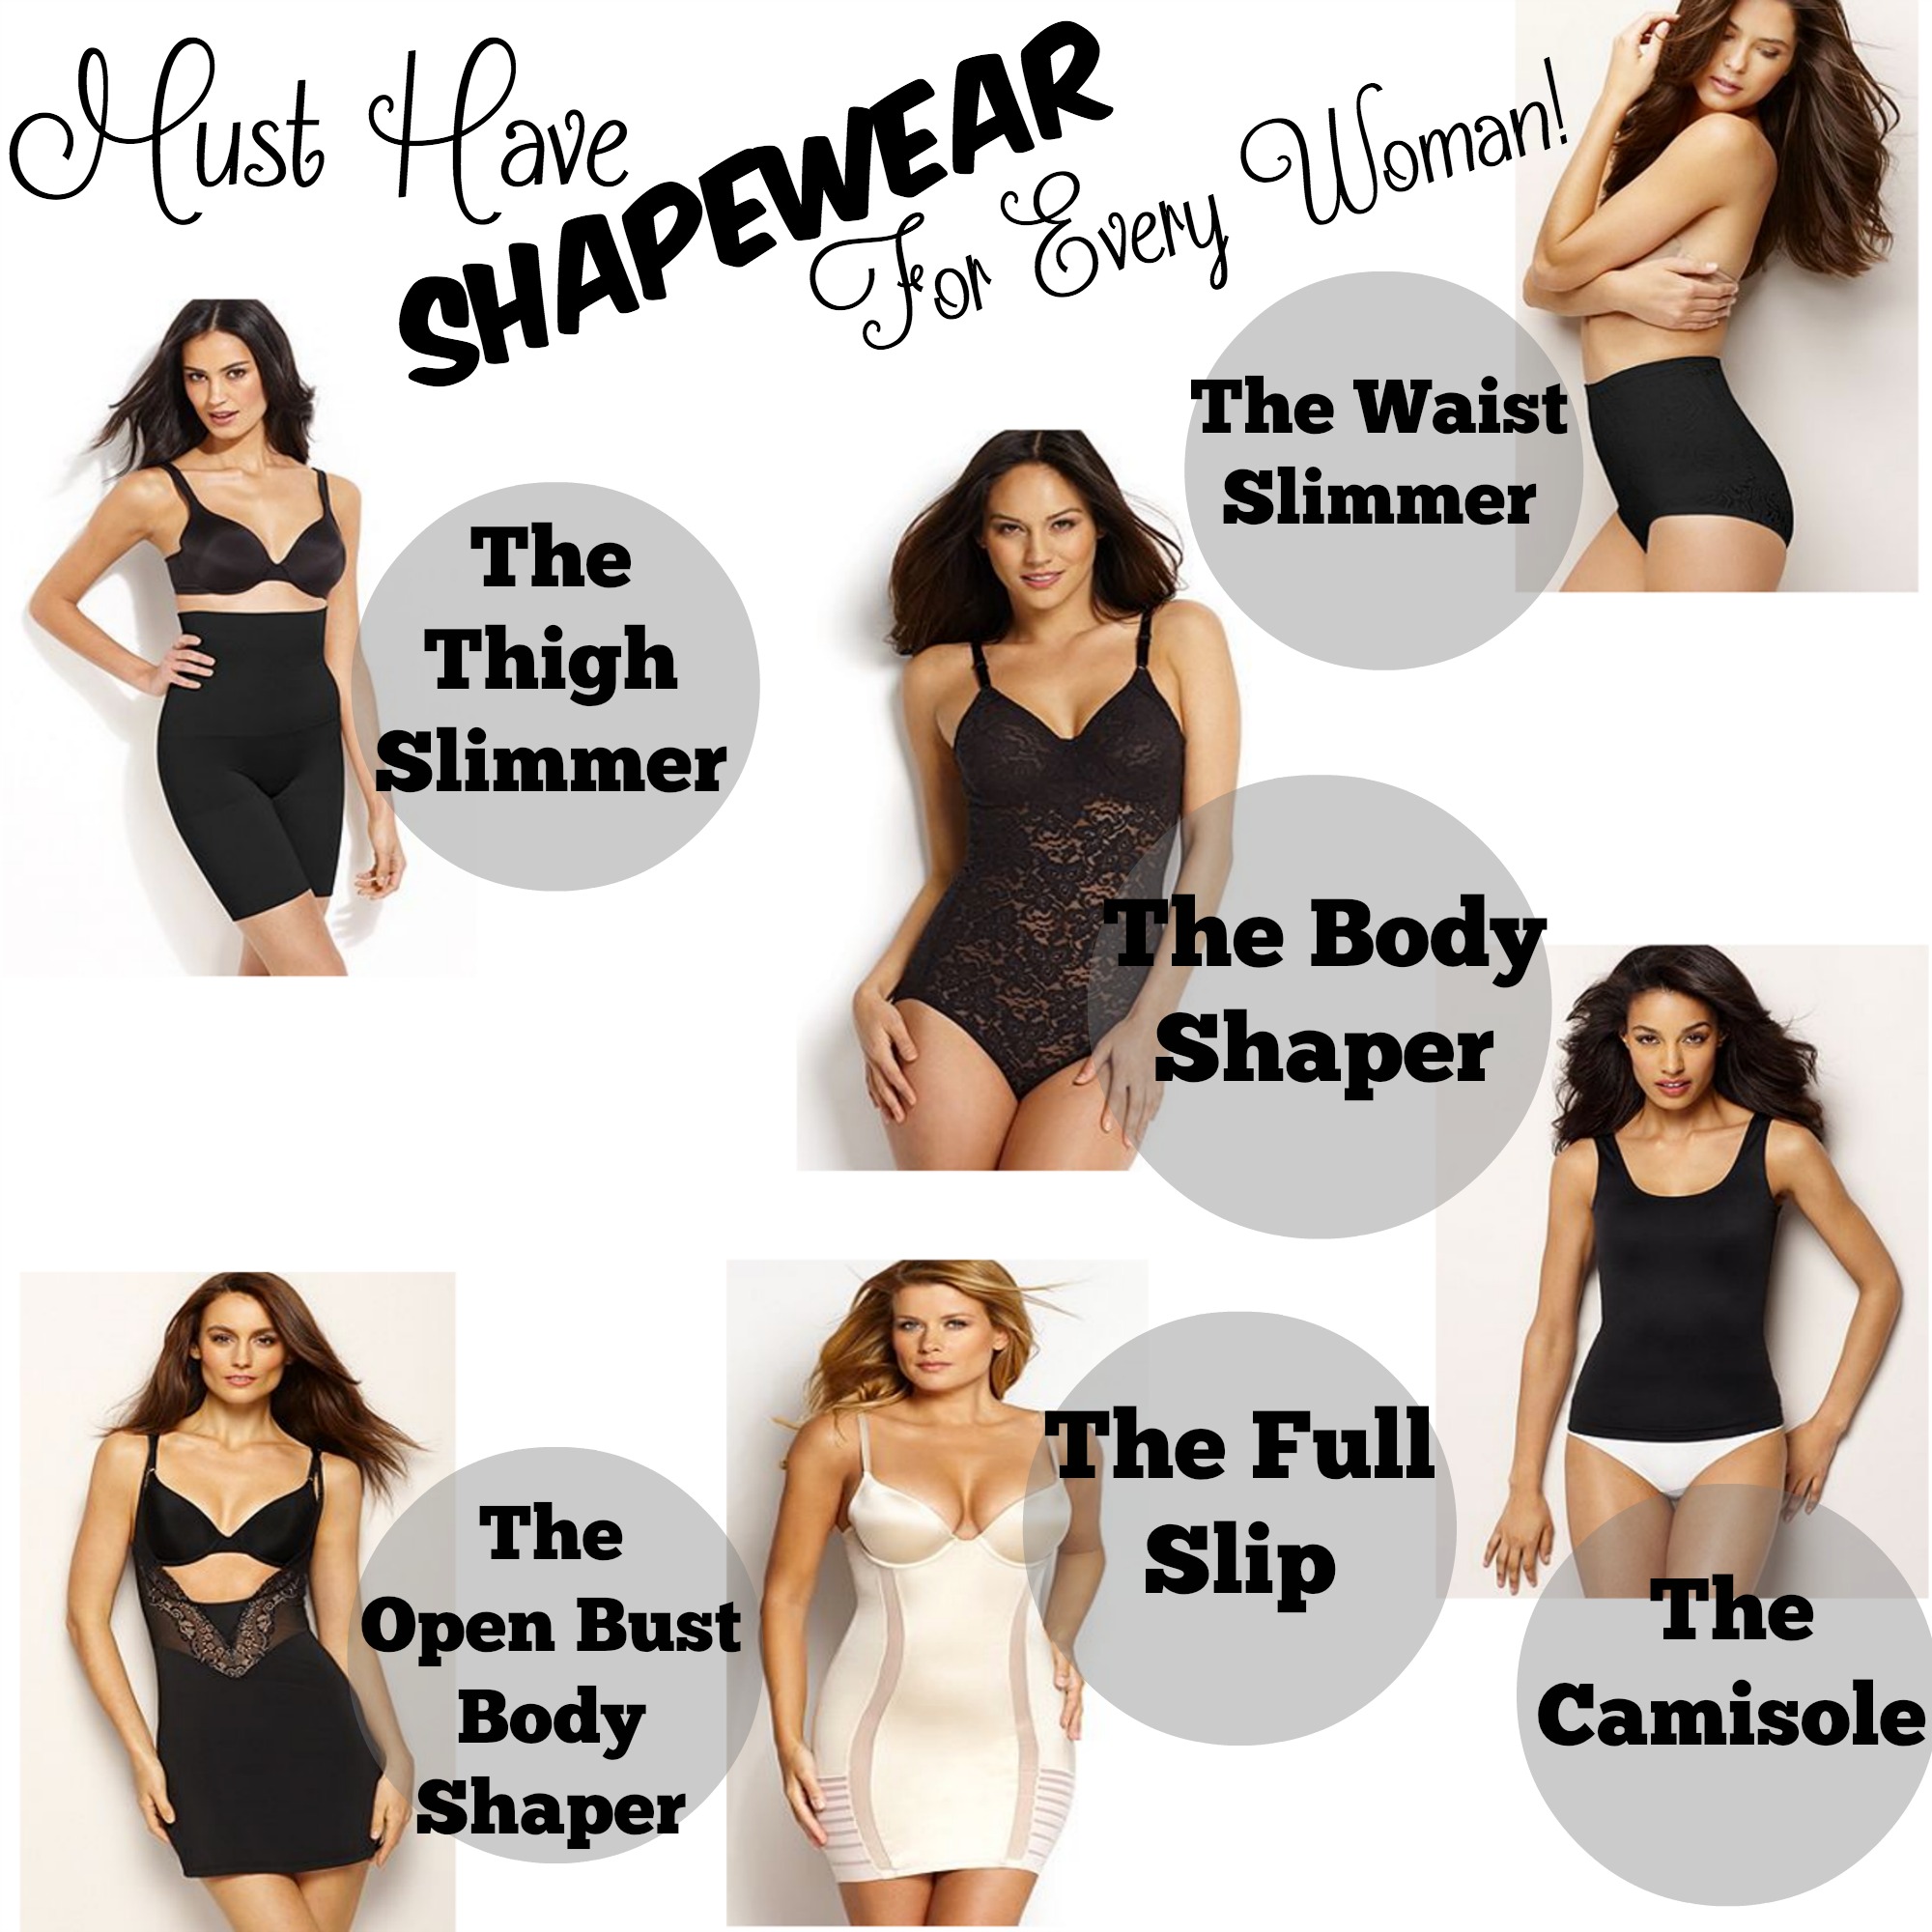 8 Things You Should Consider Before Buying Shapewear – Vanitynoapologies